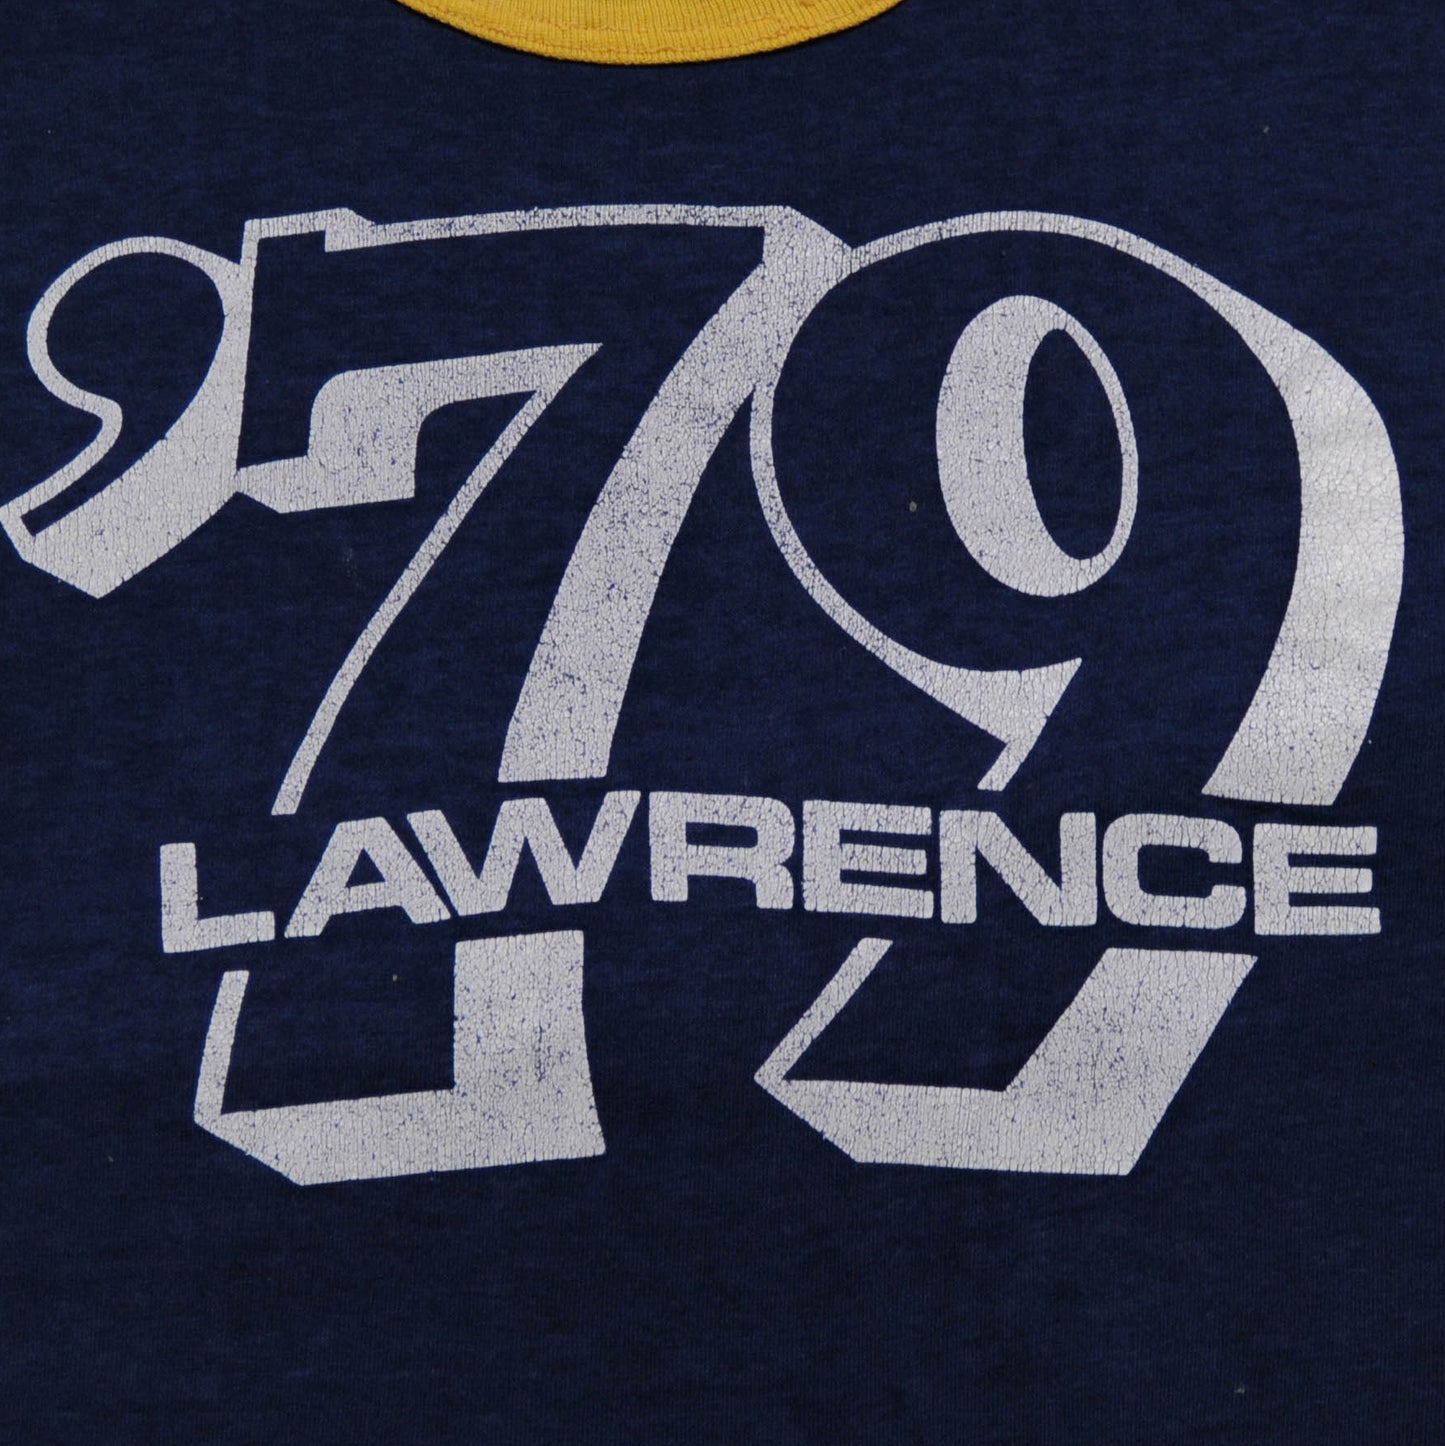 70's "LAWRENCE 79" Tシャツ (不明)/A3780T-O